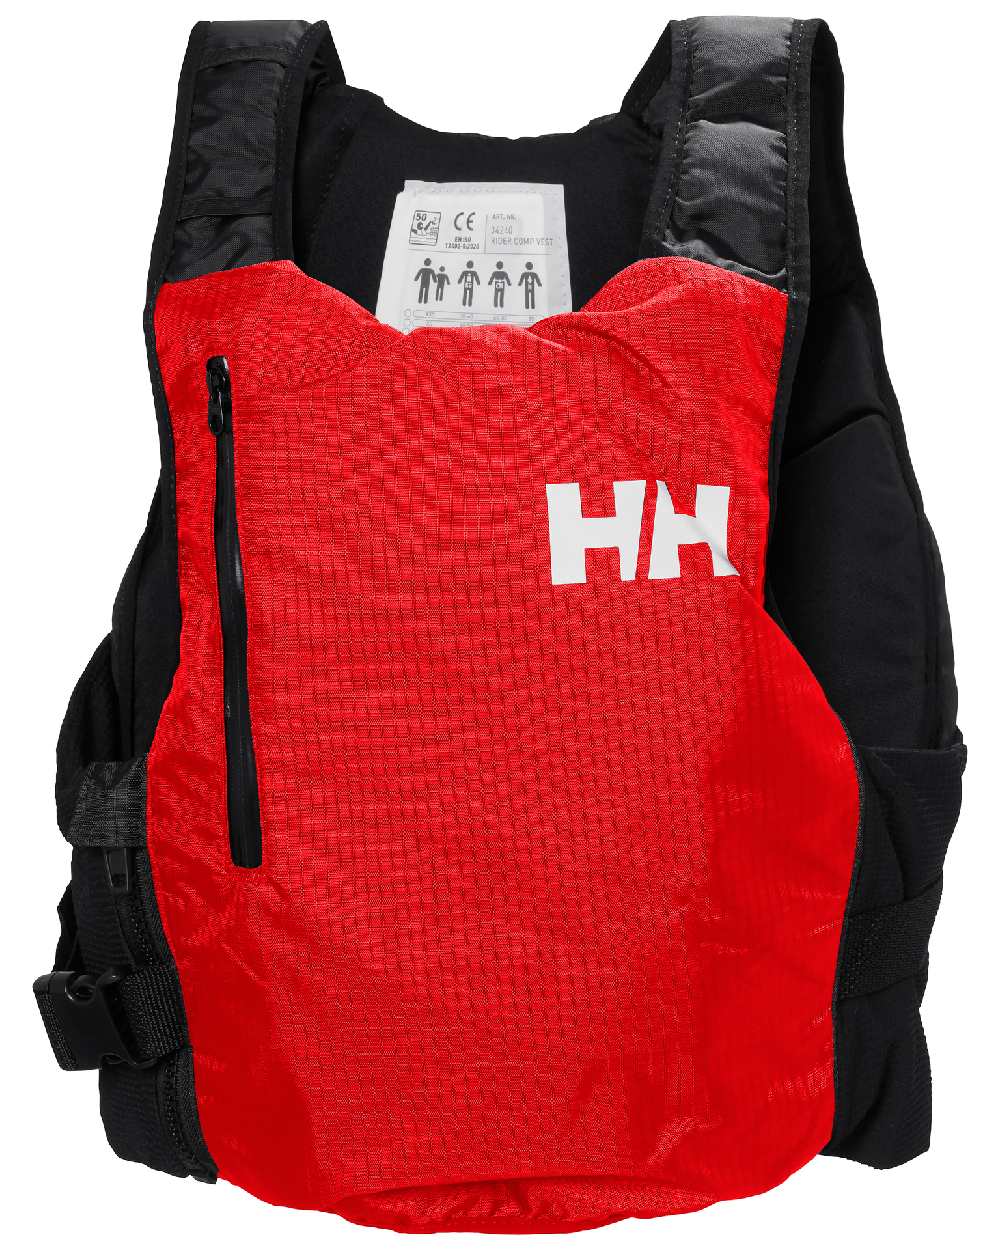 Alert Red coloured Helly Hansen Rider Foil Race Life Jacket on white background 